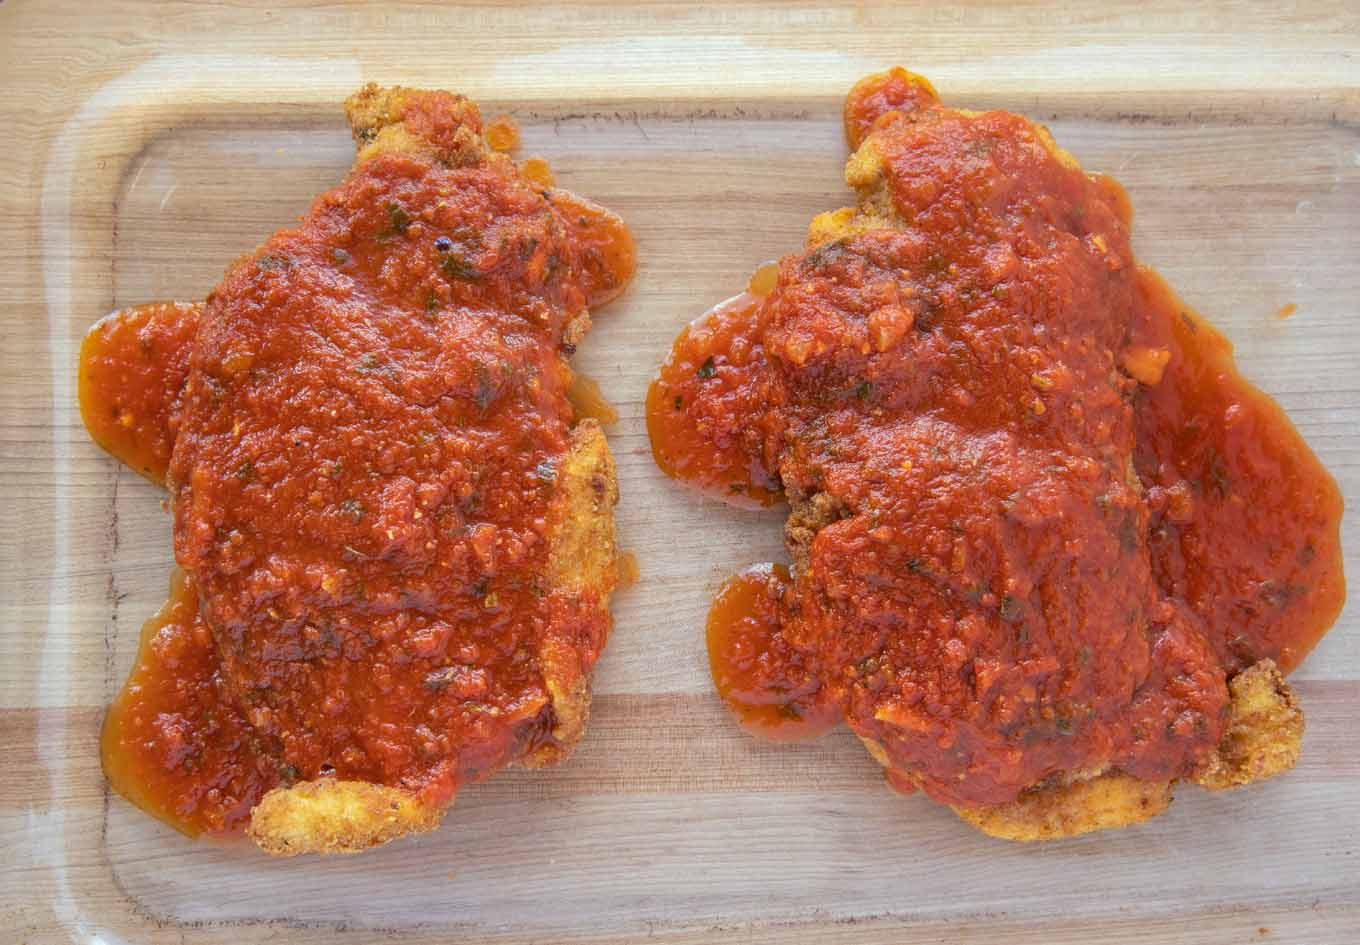 Fried chicken cutlets topped with tomato sauce.